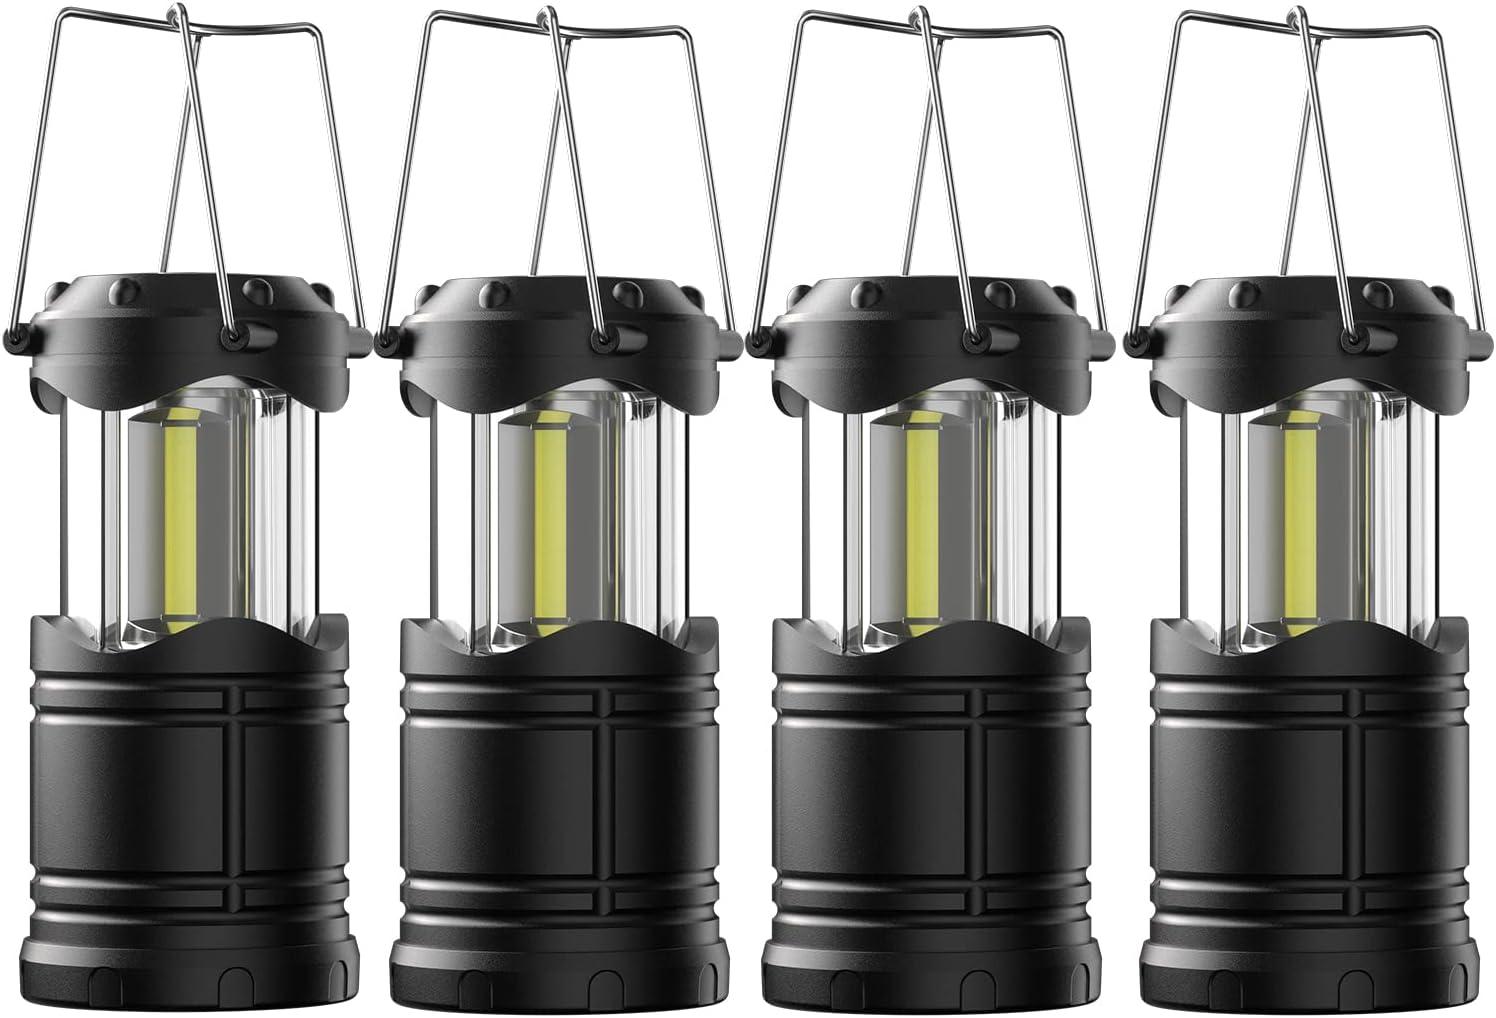 Lichamp Battery Powered LED Camping Lanterns 4 Pack for $22.99